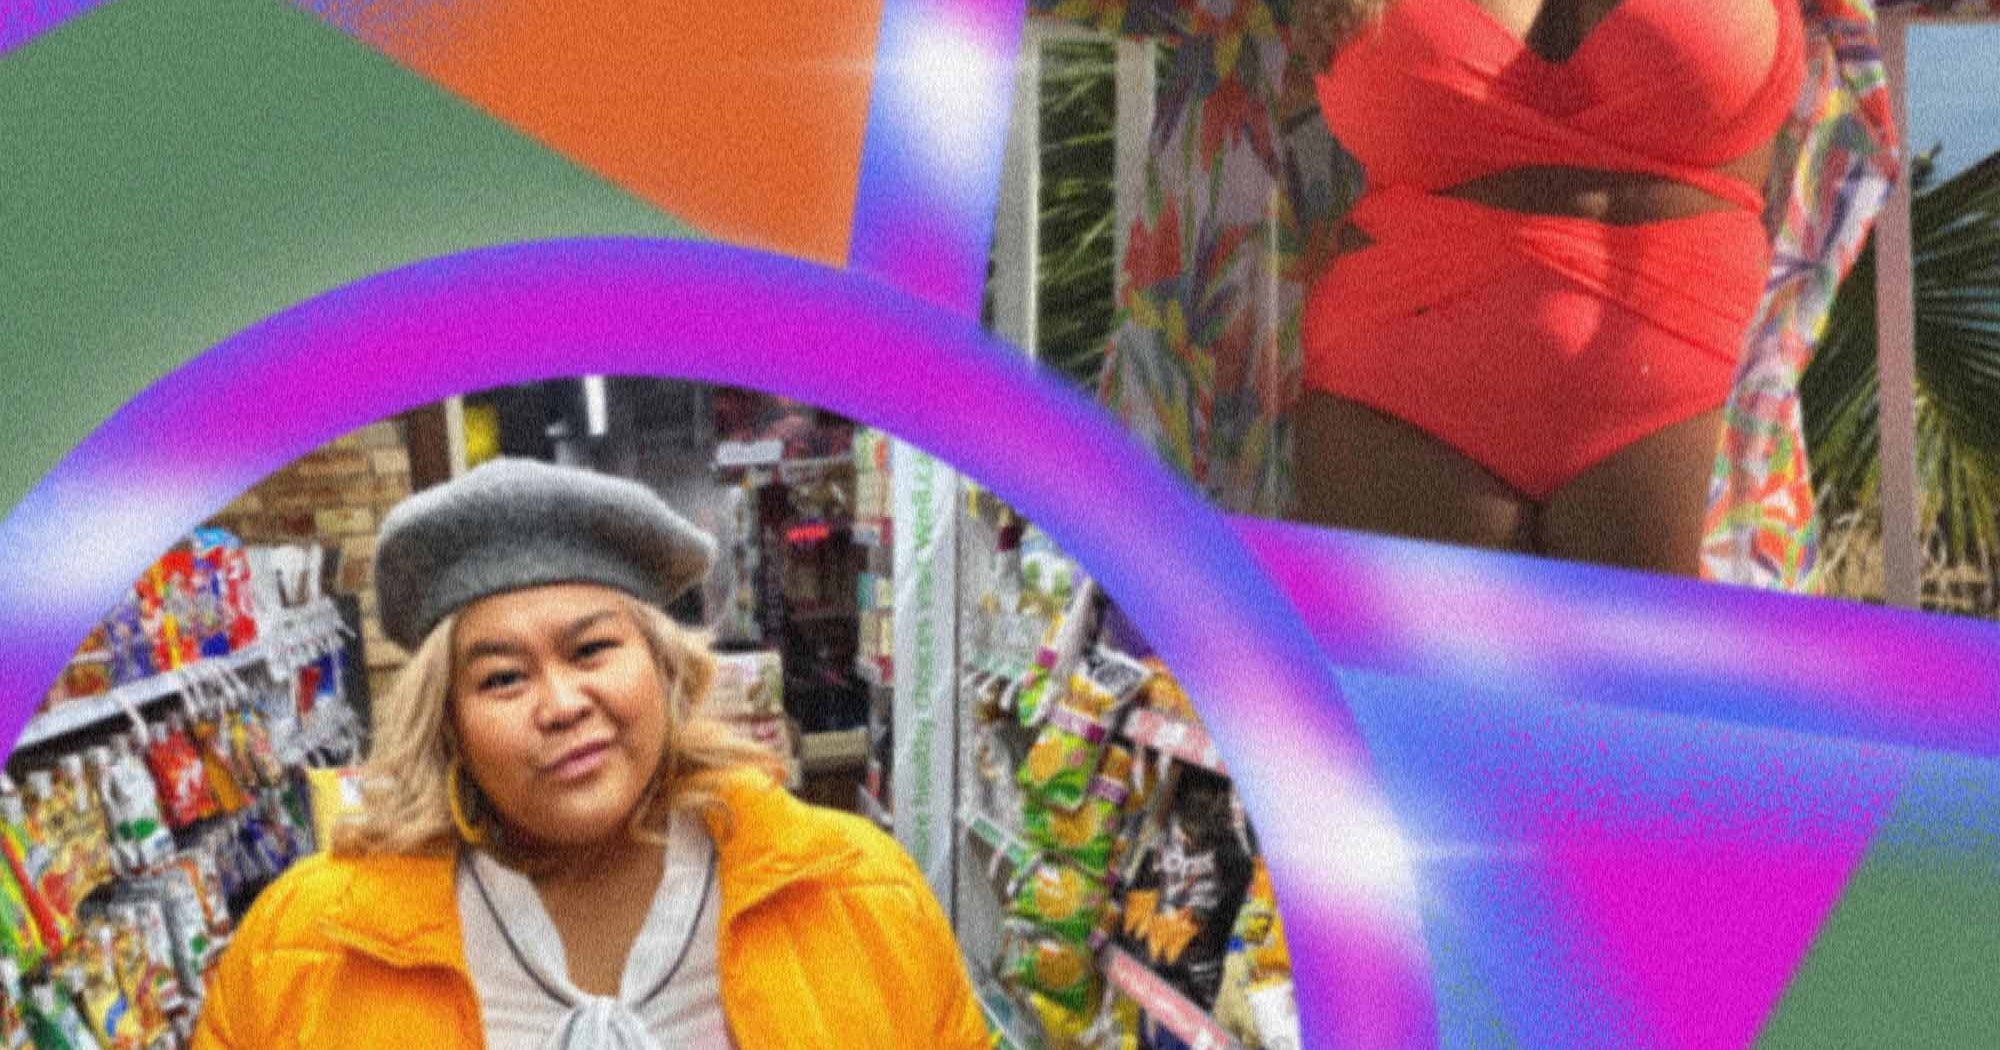 Finding My Personal Style Helped Me Embrace My Filipina Identity